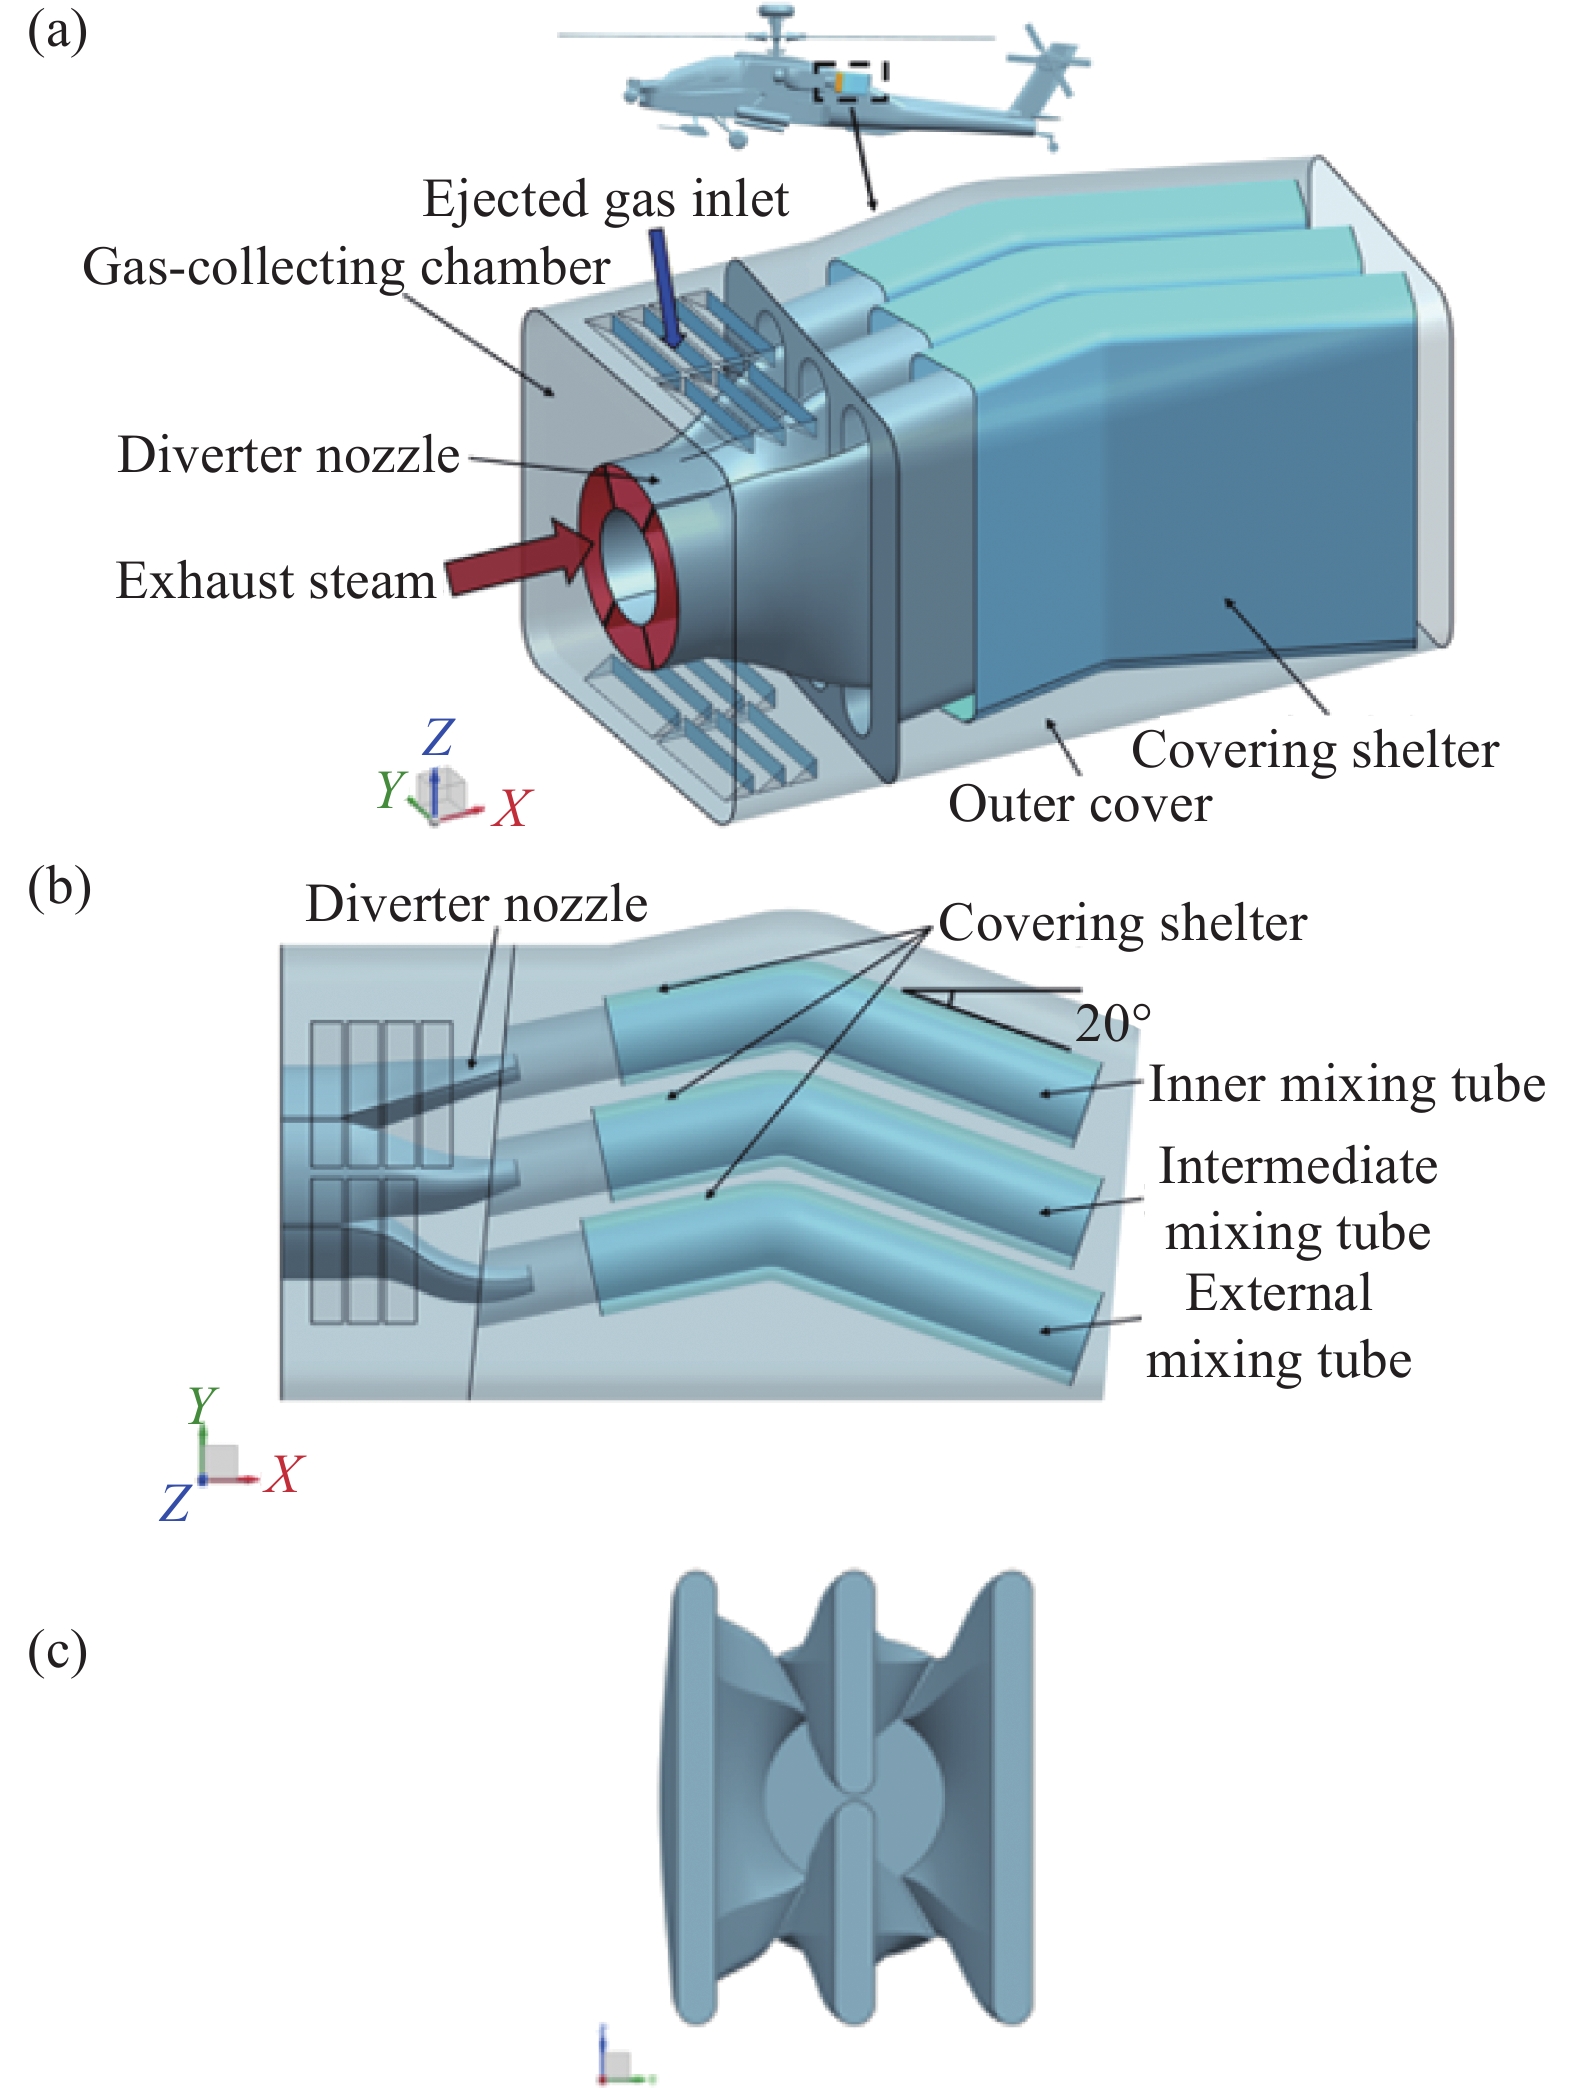 (a) Diverter nozzle ejector infrared suppressor；(b) Top view of infrared suppressor；(c) Diverter nozzle (tail perspective)